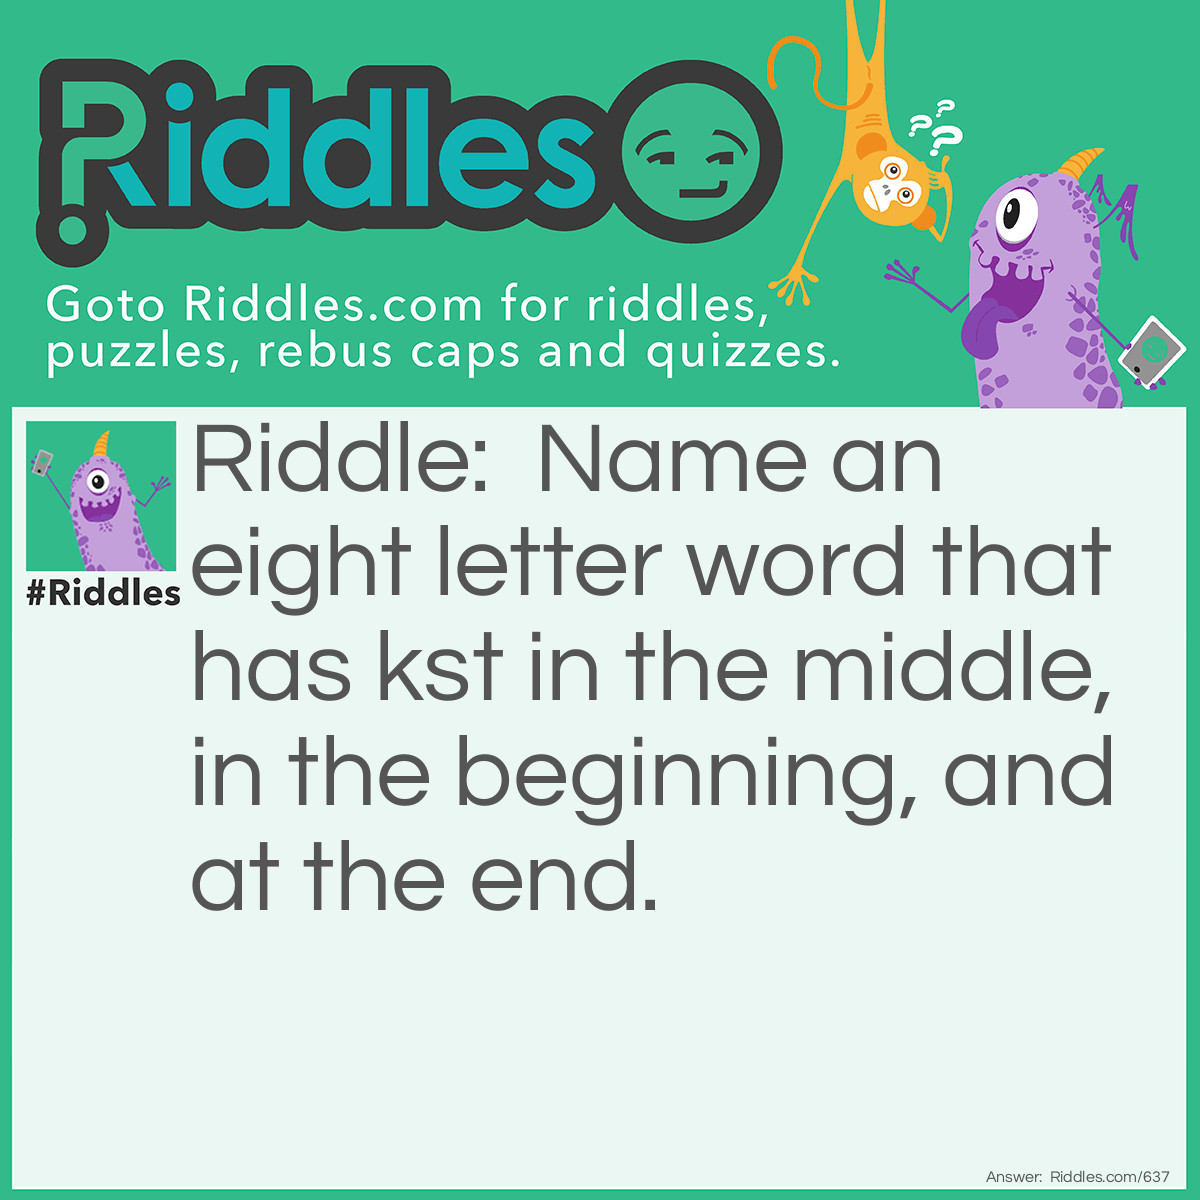 Riddle: Name an eight-letter word that has kst in the middle, in the beginning, and at the end. What is it? Answer: Inkstand - kst is in the middle. "In" is the beginning, and "and" ends the word.